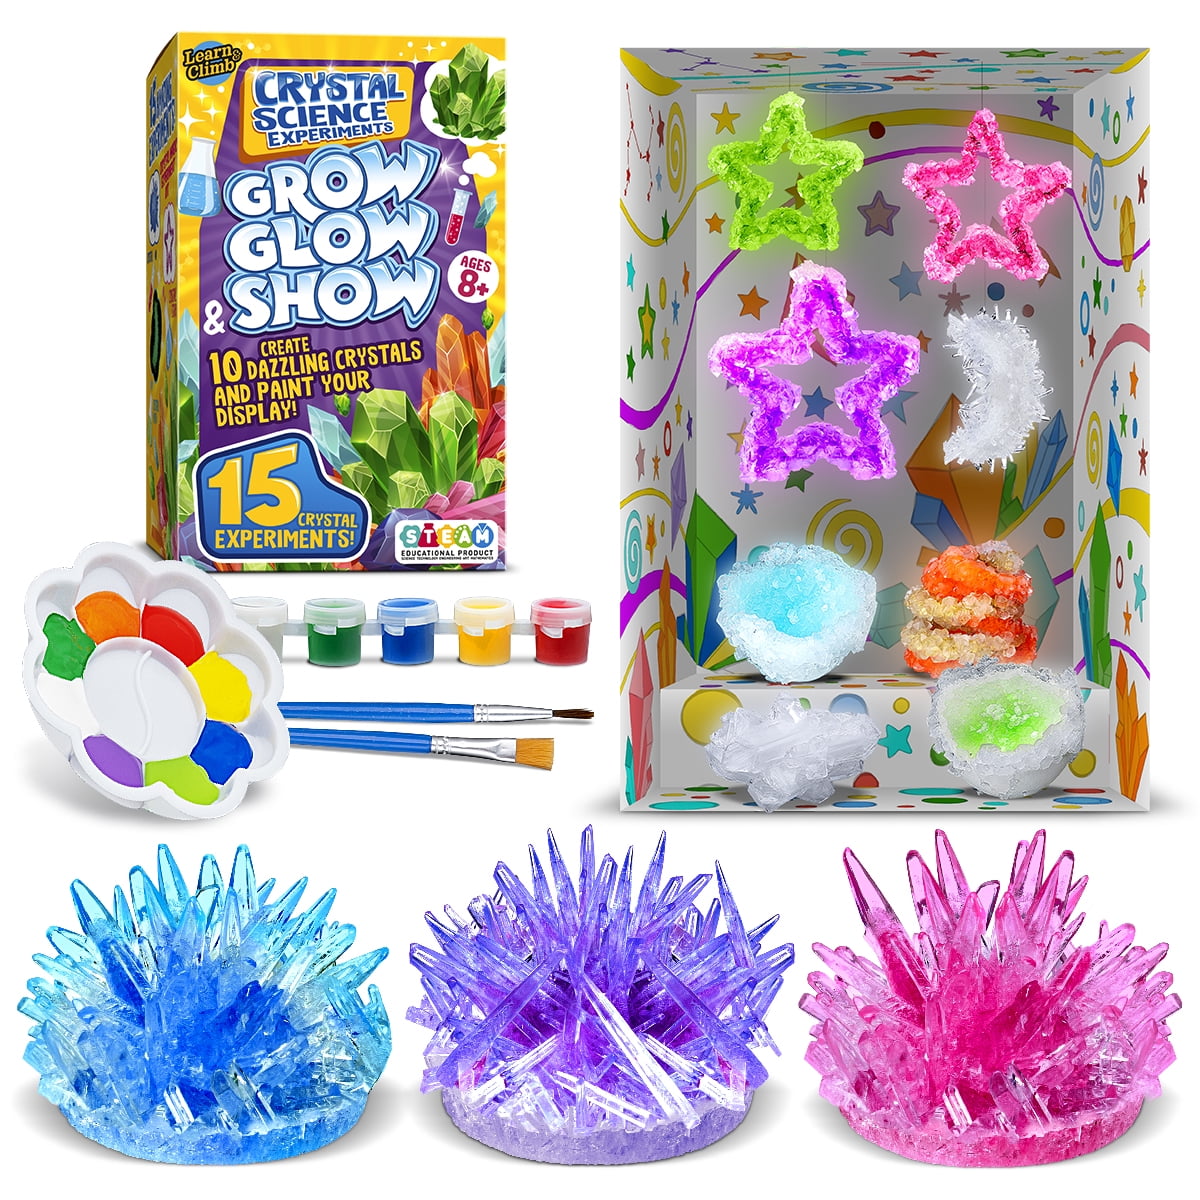  sdaymol Glowing Crystal Growing Kit,Science Kits for Kids Age  8-12,DIY Science Experiments Lab Learning & Educational Toys,STEM Projects  Toys Gifts for Boys & Girls Ages 8 9 10 12 : Toys